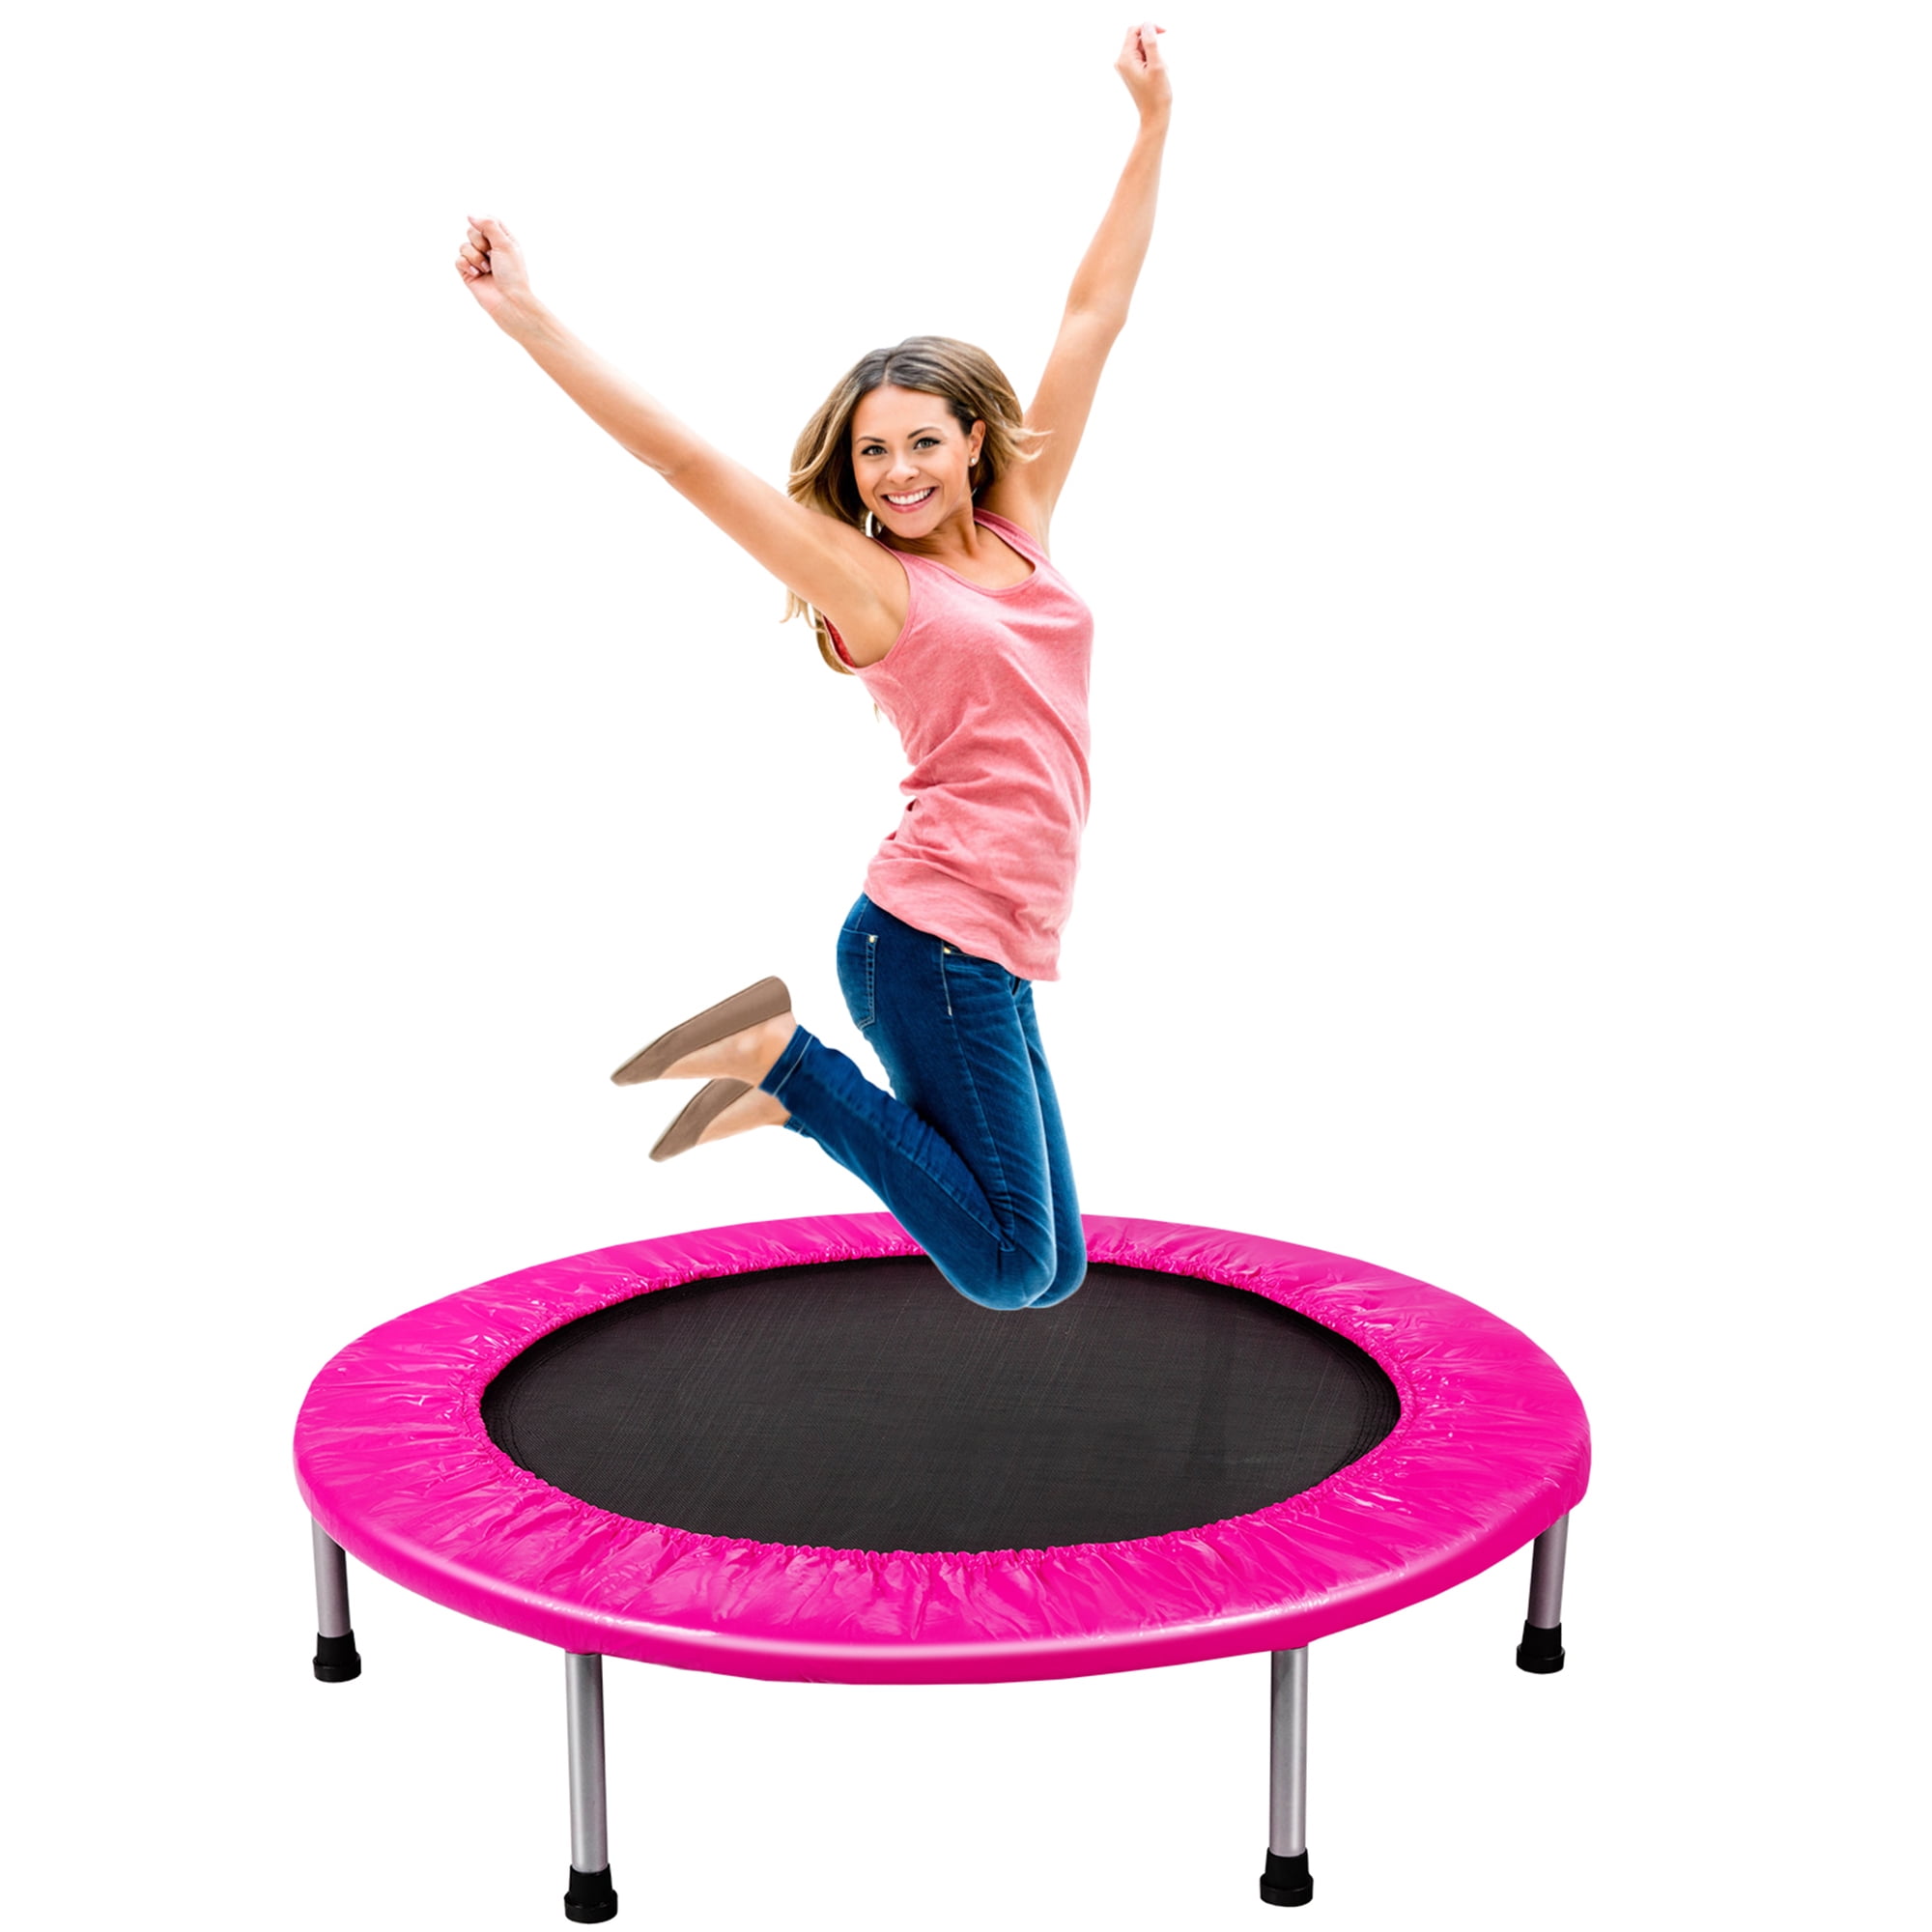 New-Bounce Mini Trampoline - Foldable Trampoline for Children and Adults -  Fitness Rebounder Trampoline - Holds Up to 150-220 Lbs